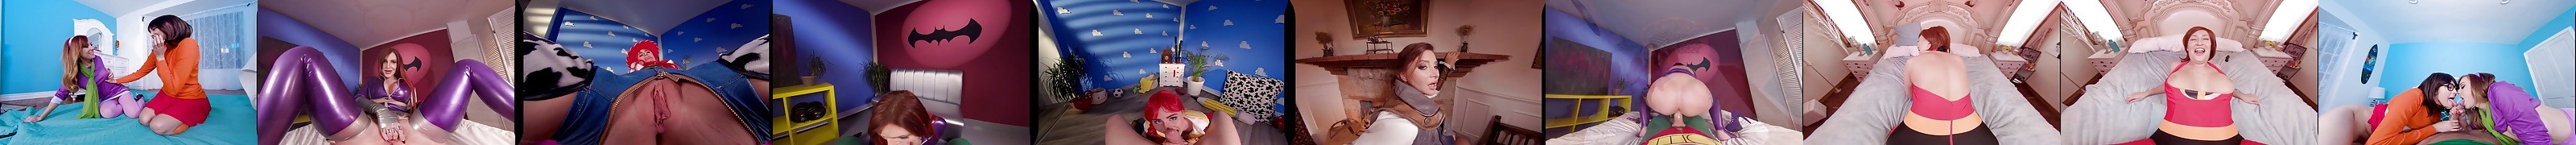 Vrcosplayx Mad Moxxi Slides Your Dick Between Her Huge Boobs Xhamster 1728